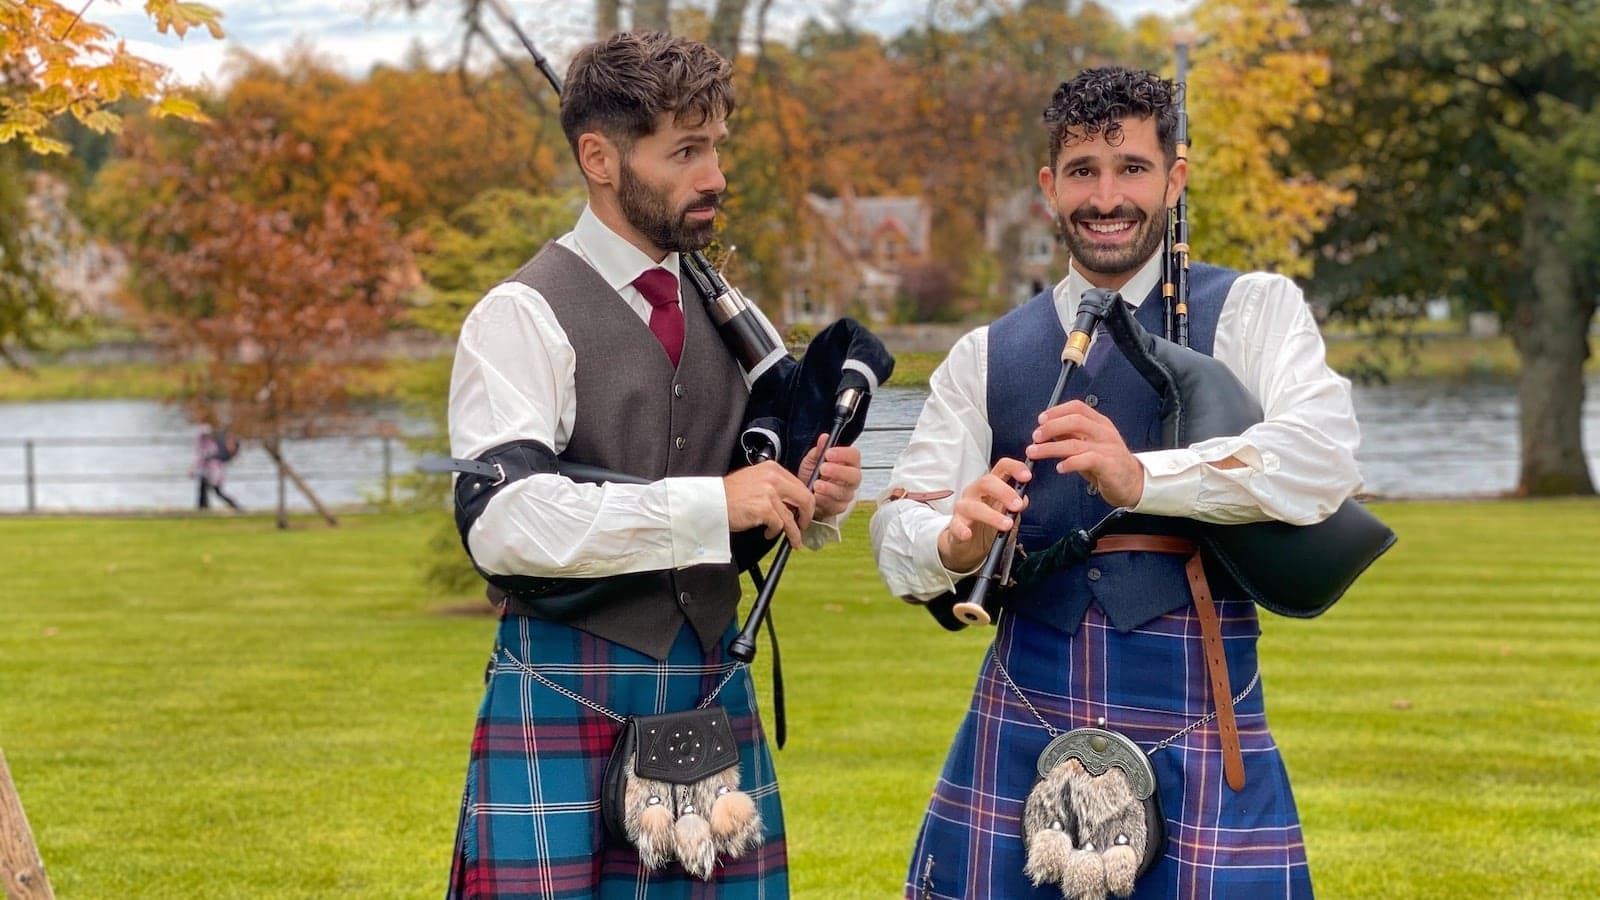 Learning to play bagpipes in our kilts in Inverness, Scotland.